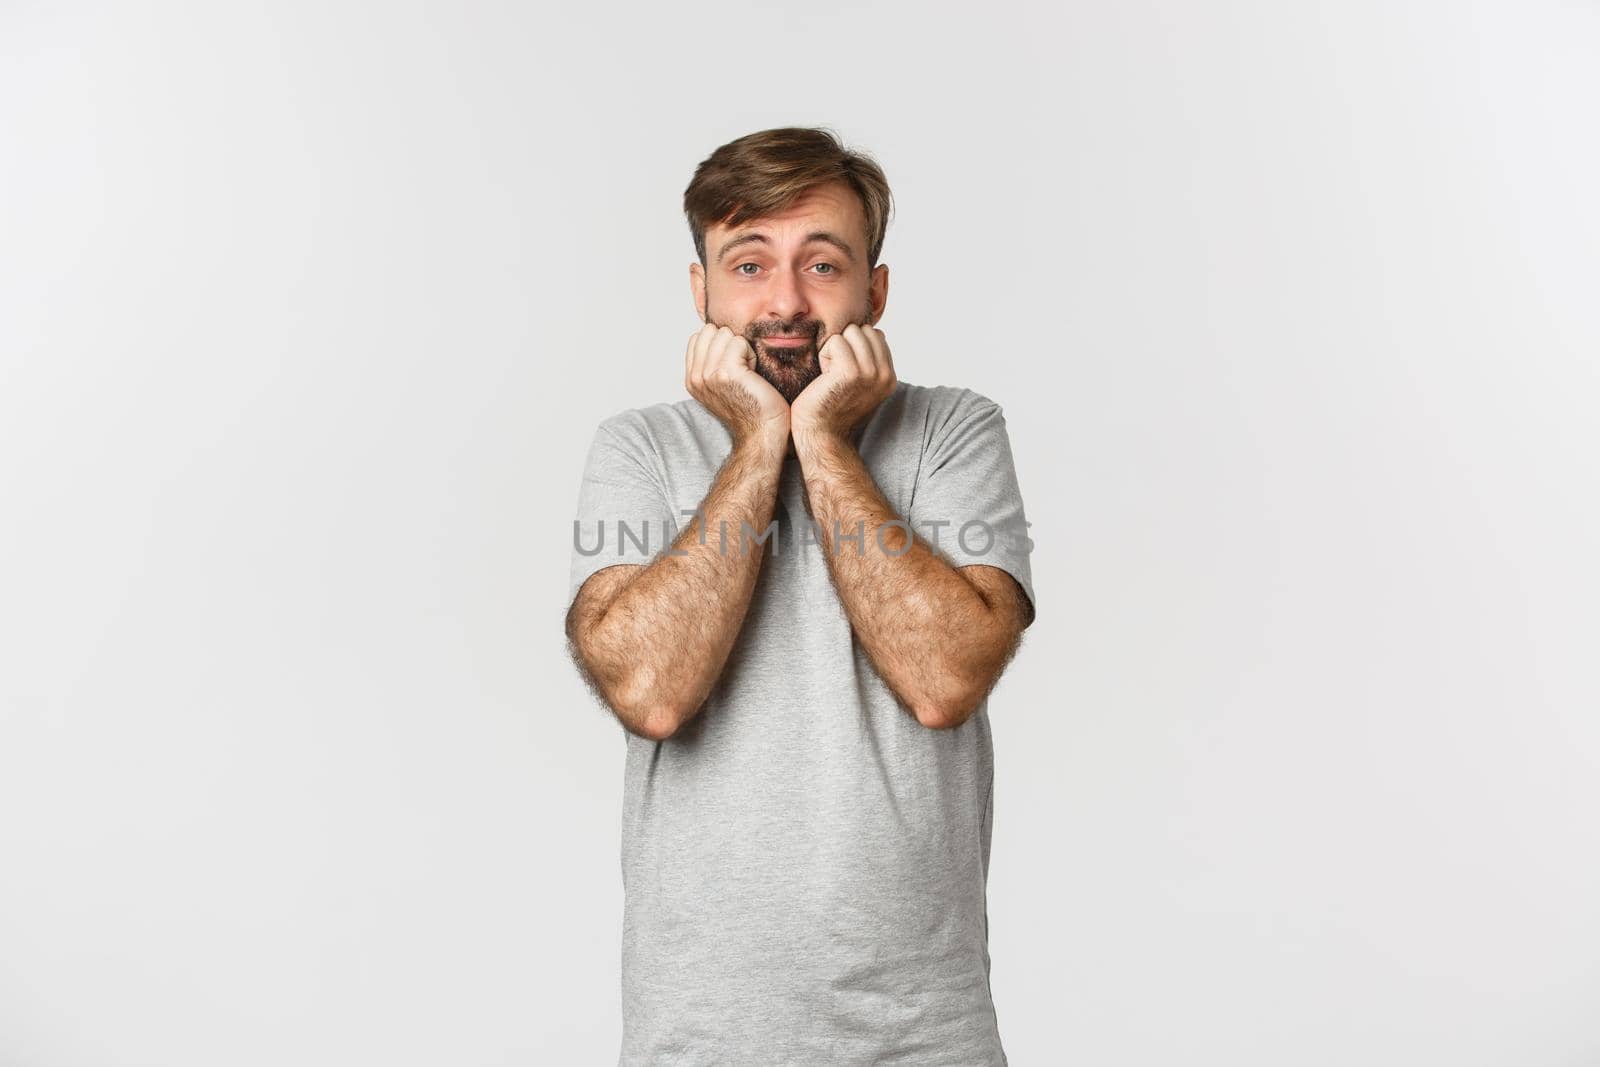 Portrait of cute and silly adult man with beard, leaning on palm and looking at camera silly, standing over white background.